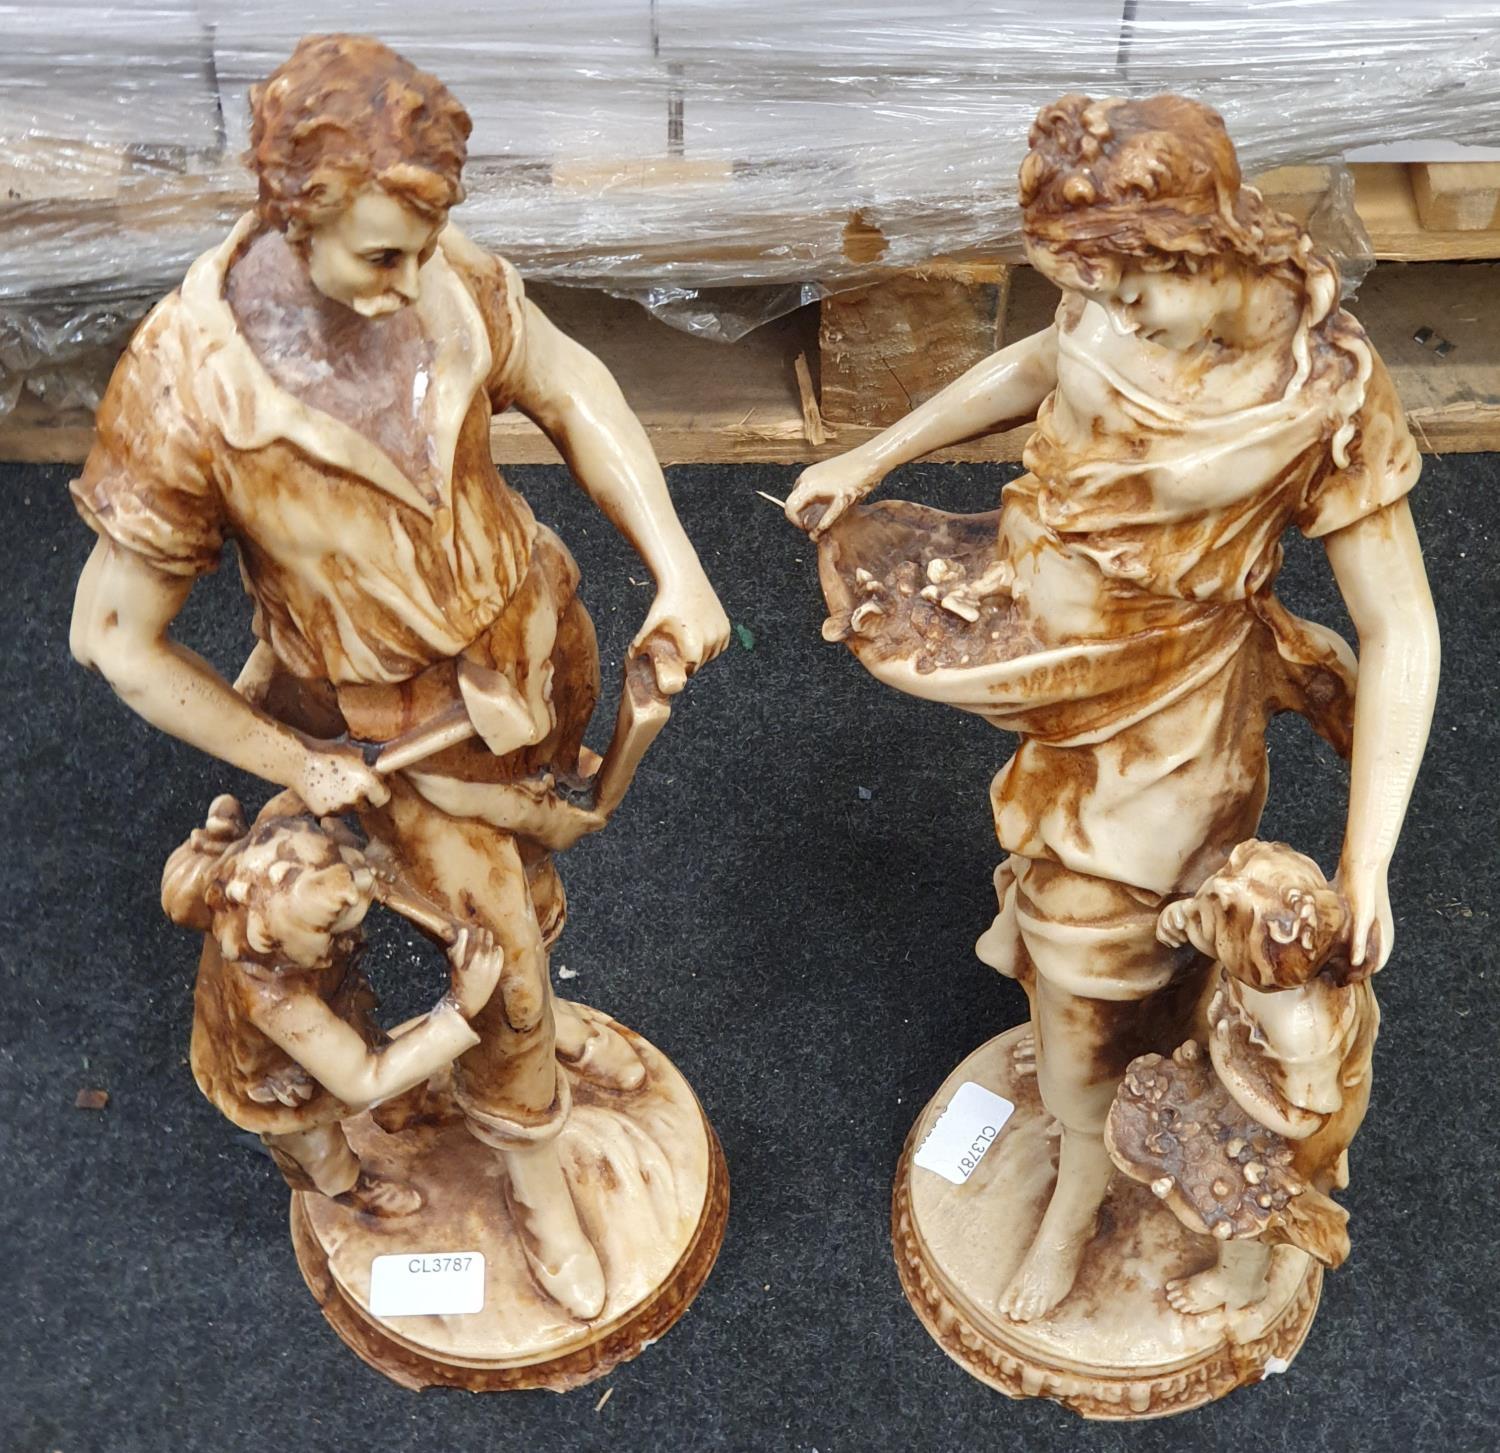 A pair of resin figurines.